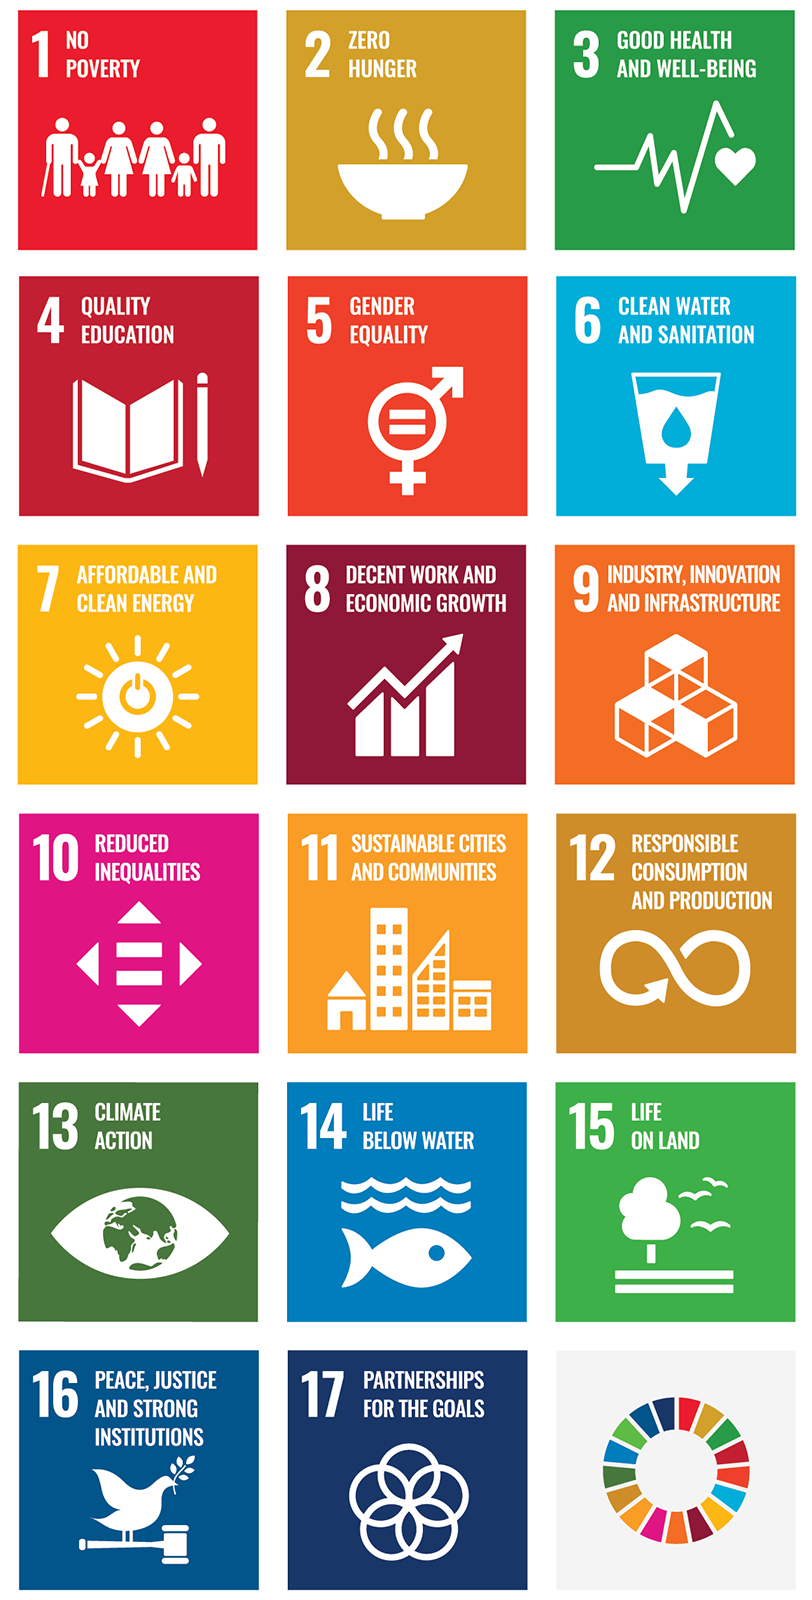 Overview of all 17 Sustainable Development Goals